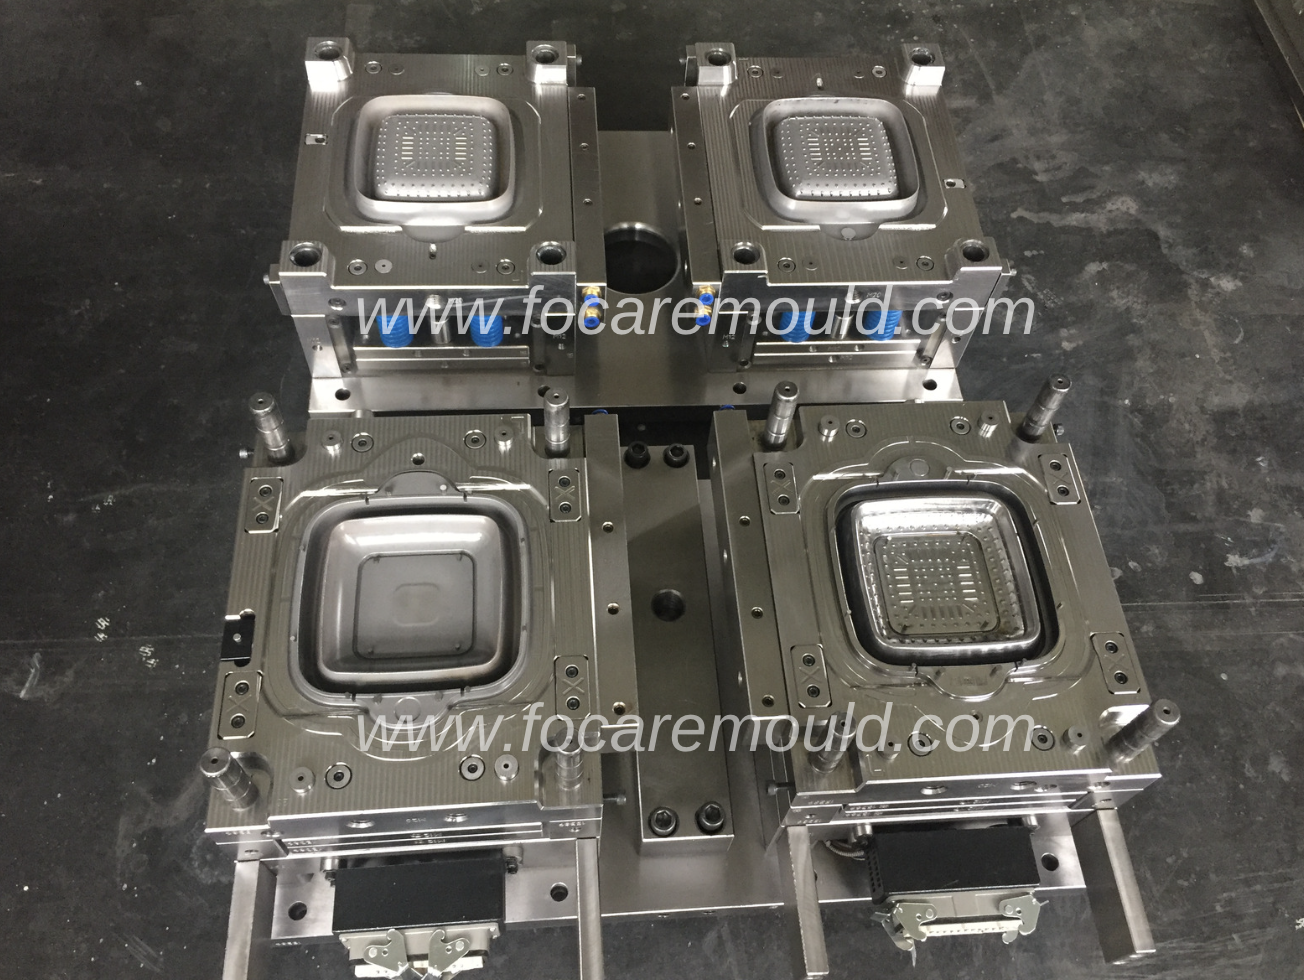 High quality Two-color Plastic Collapsible Strainer Injection Mold Quotes,China Two-color Plastic Collapsible Strainer Injection Mold Factory,Two-color Plastic Collapsible Strainer Injection Mold Purchasing